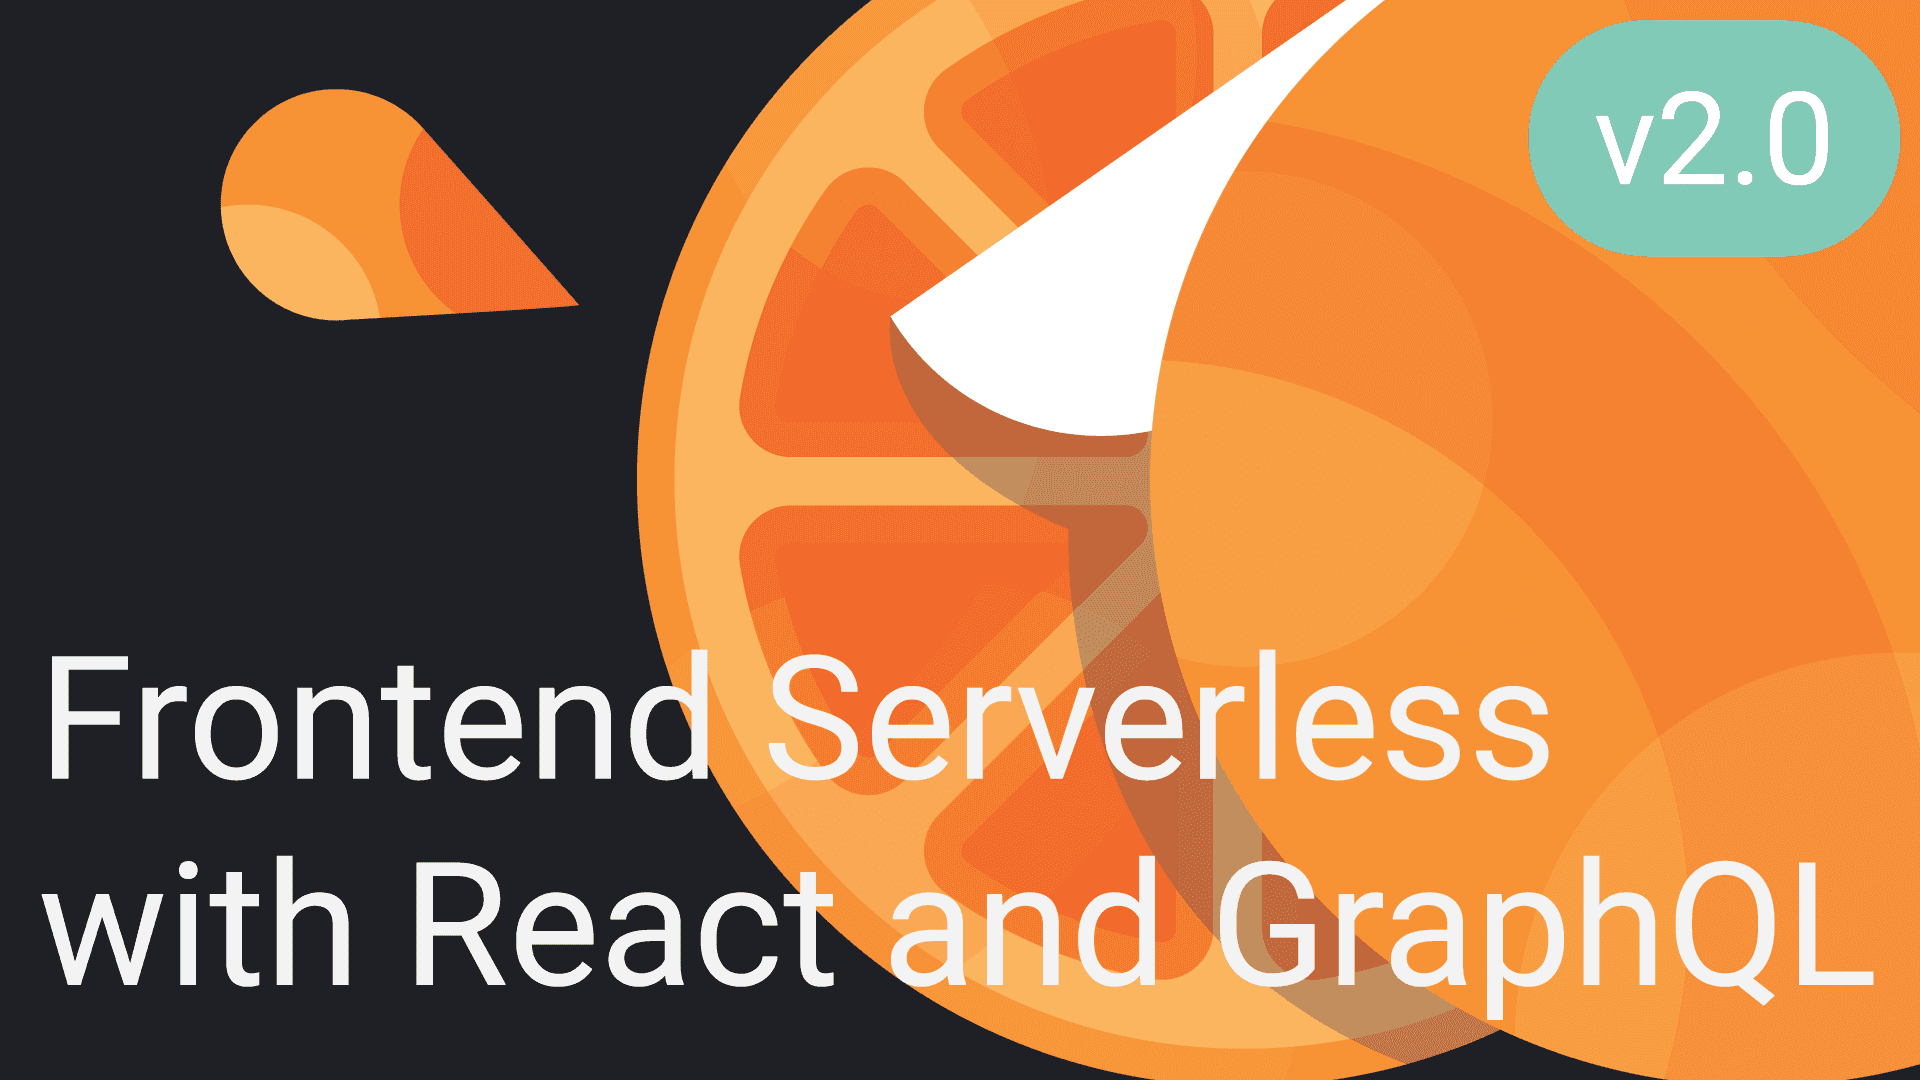 Frontend Serverless with React and GraphQL